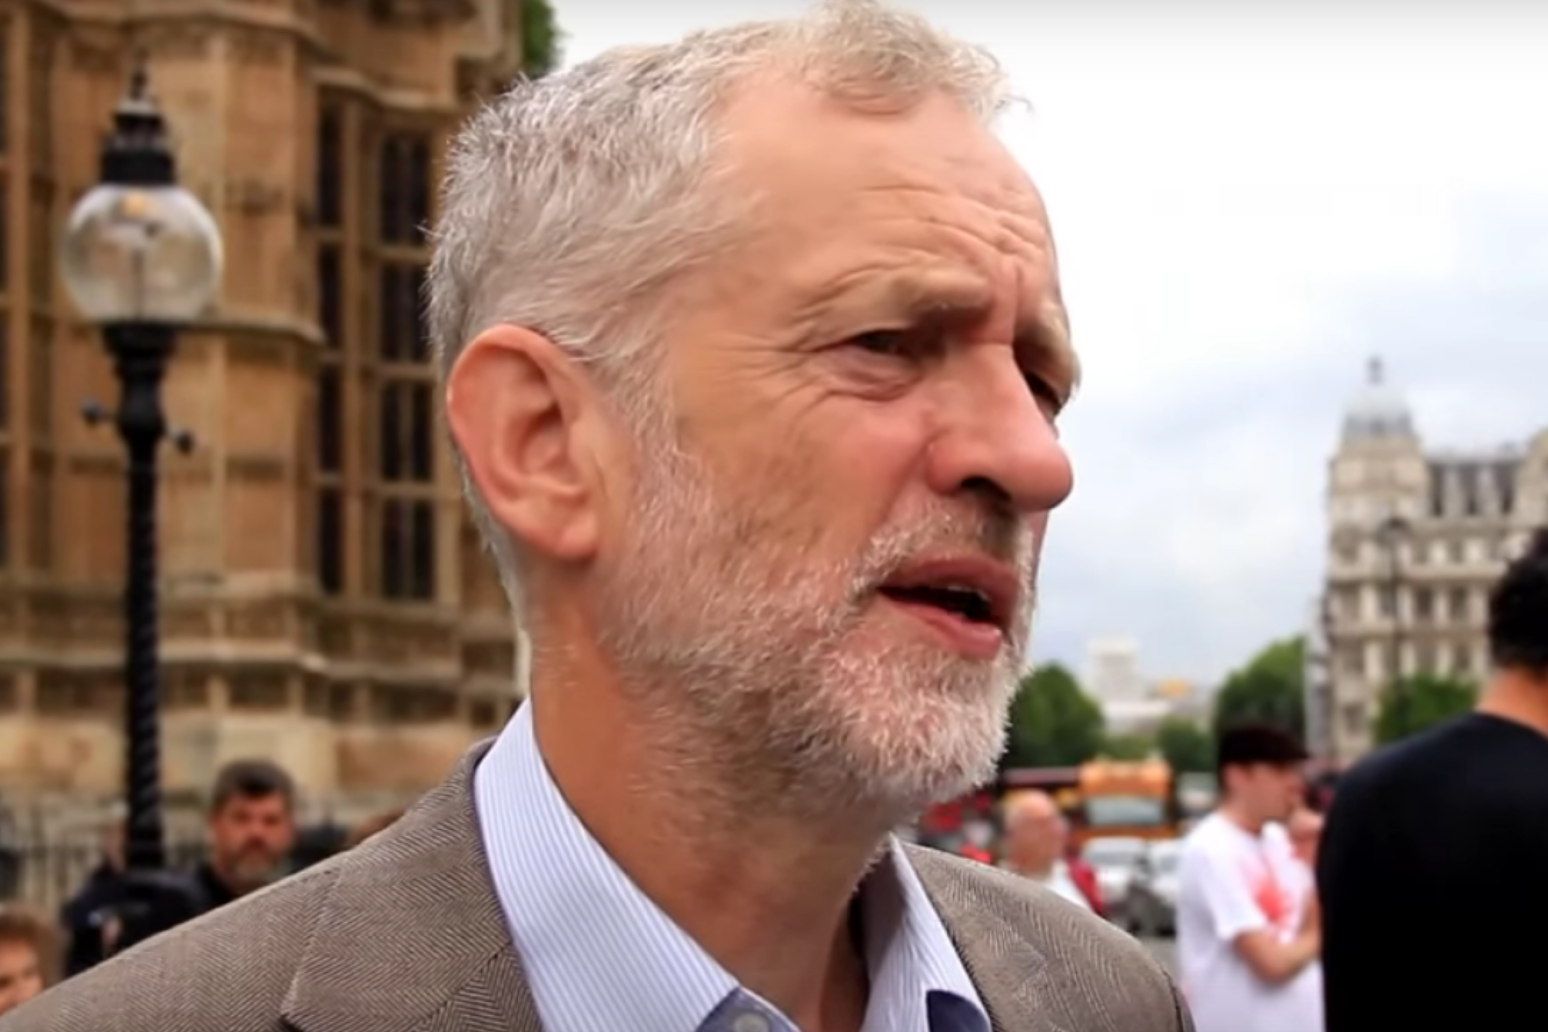 Jewish groups disappointed by talks with Corbyn on anti-Semitism 